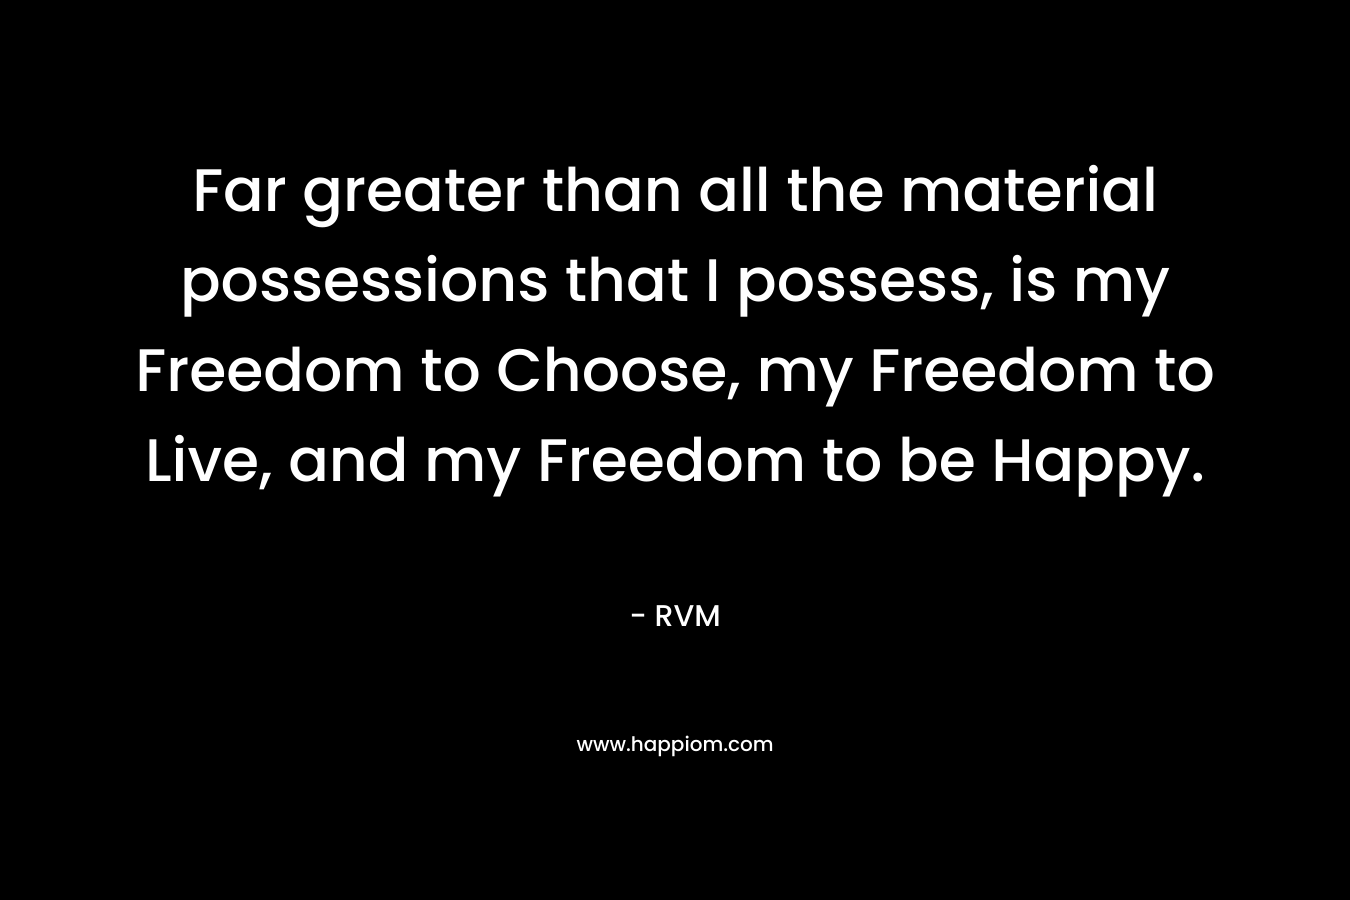 Far greater than all the material possessions that I possess, is my Freedom to Choose, my Freedom to Live, and my Freedom to be Happy.